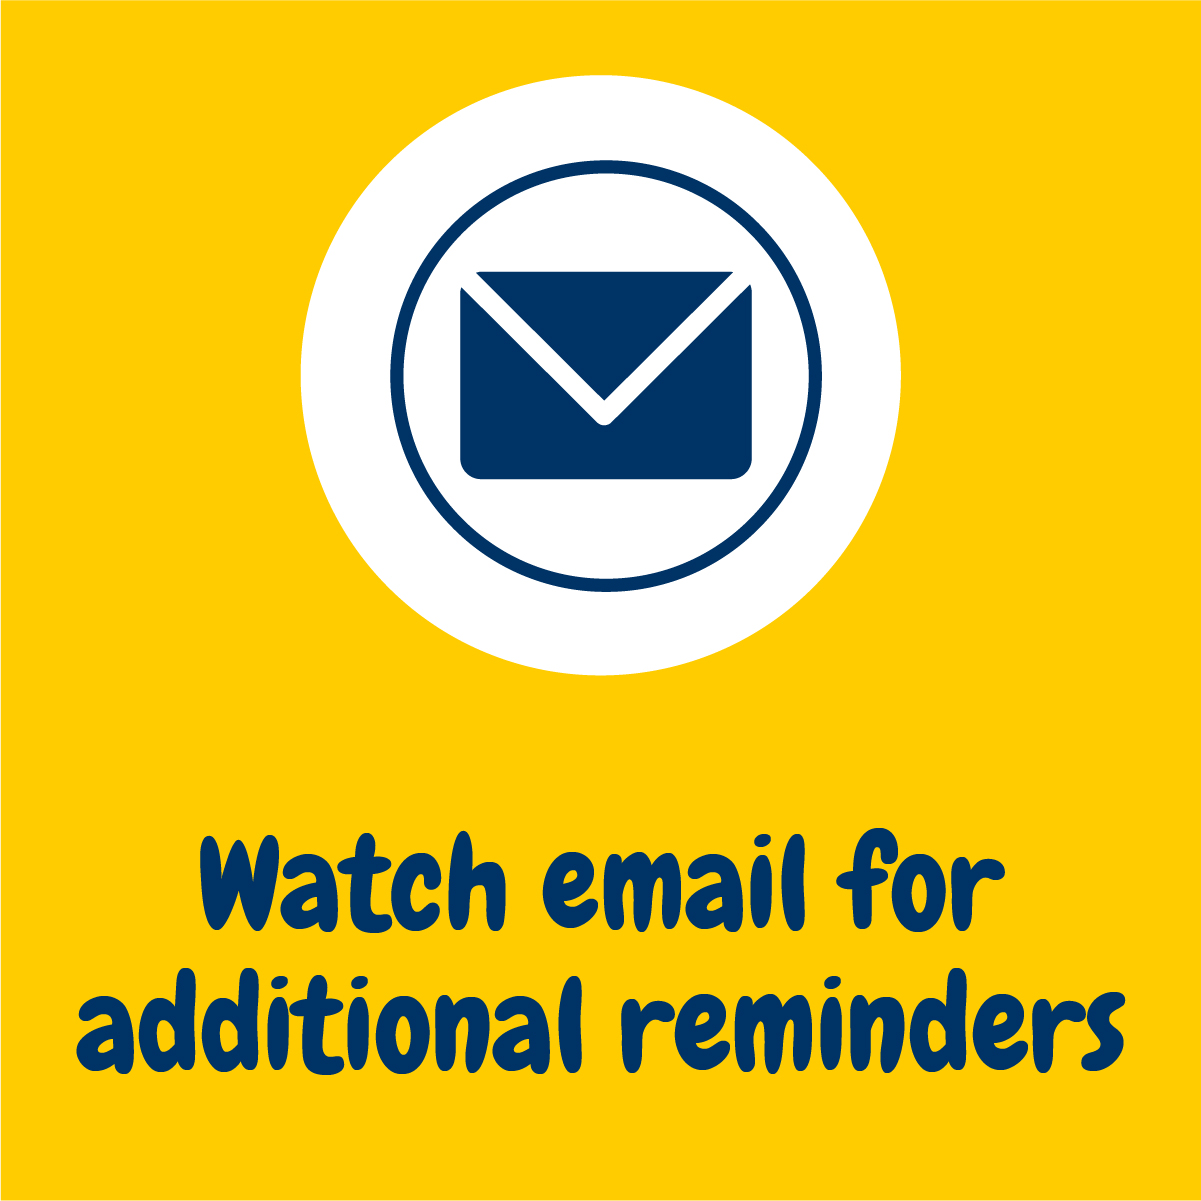 Watch email for additional reminders